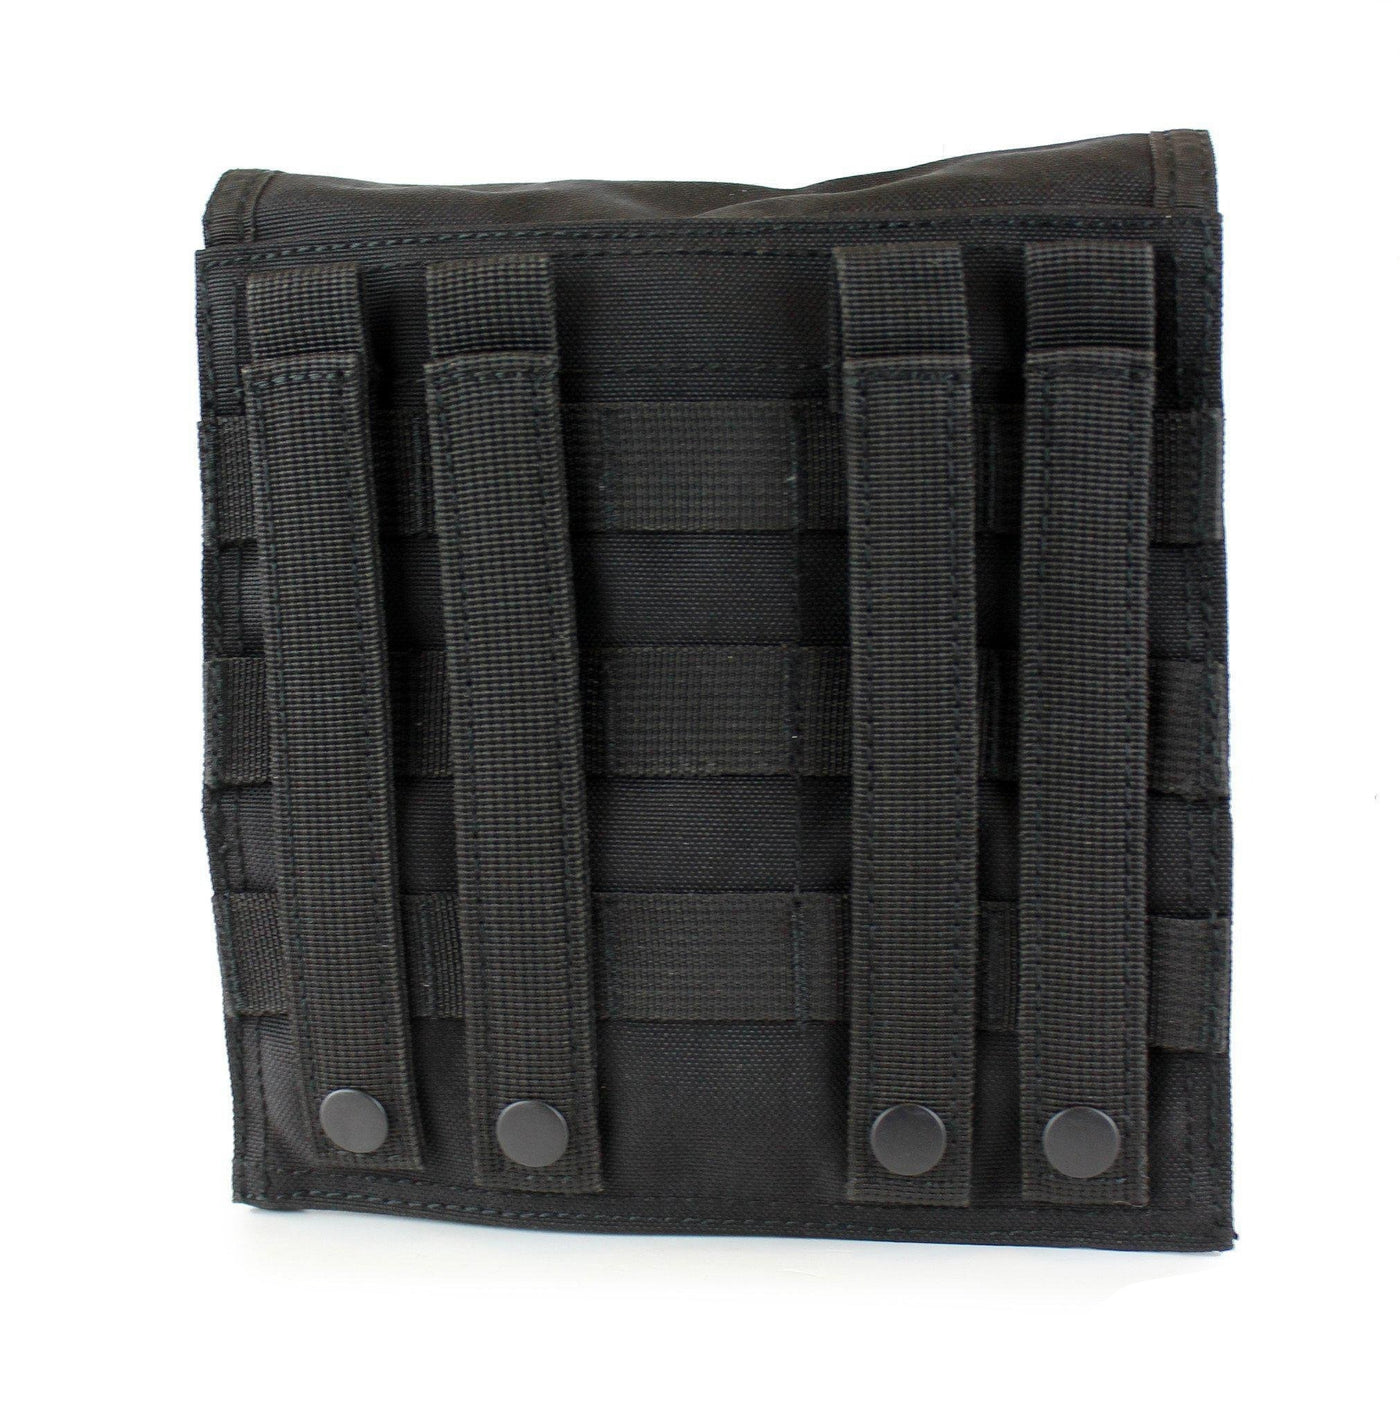 MOLLE Dual Pocket Utility Pouch for Tactical Vest-Modern Combat Sports